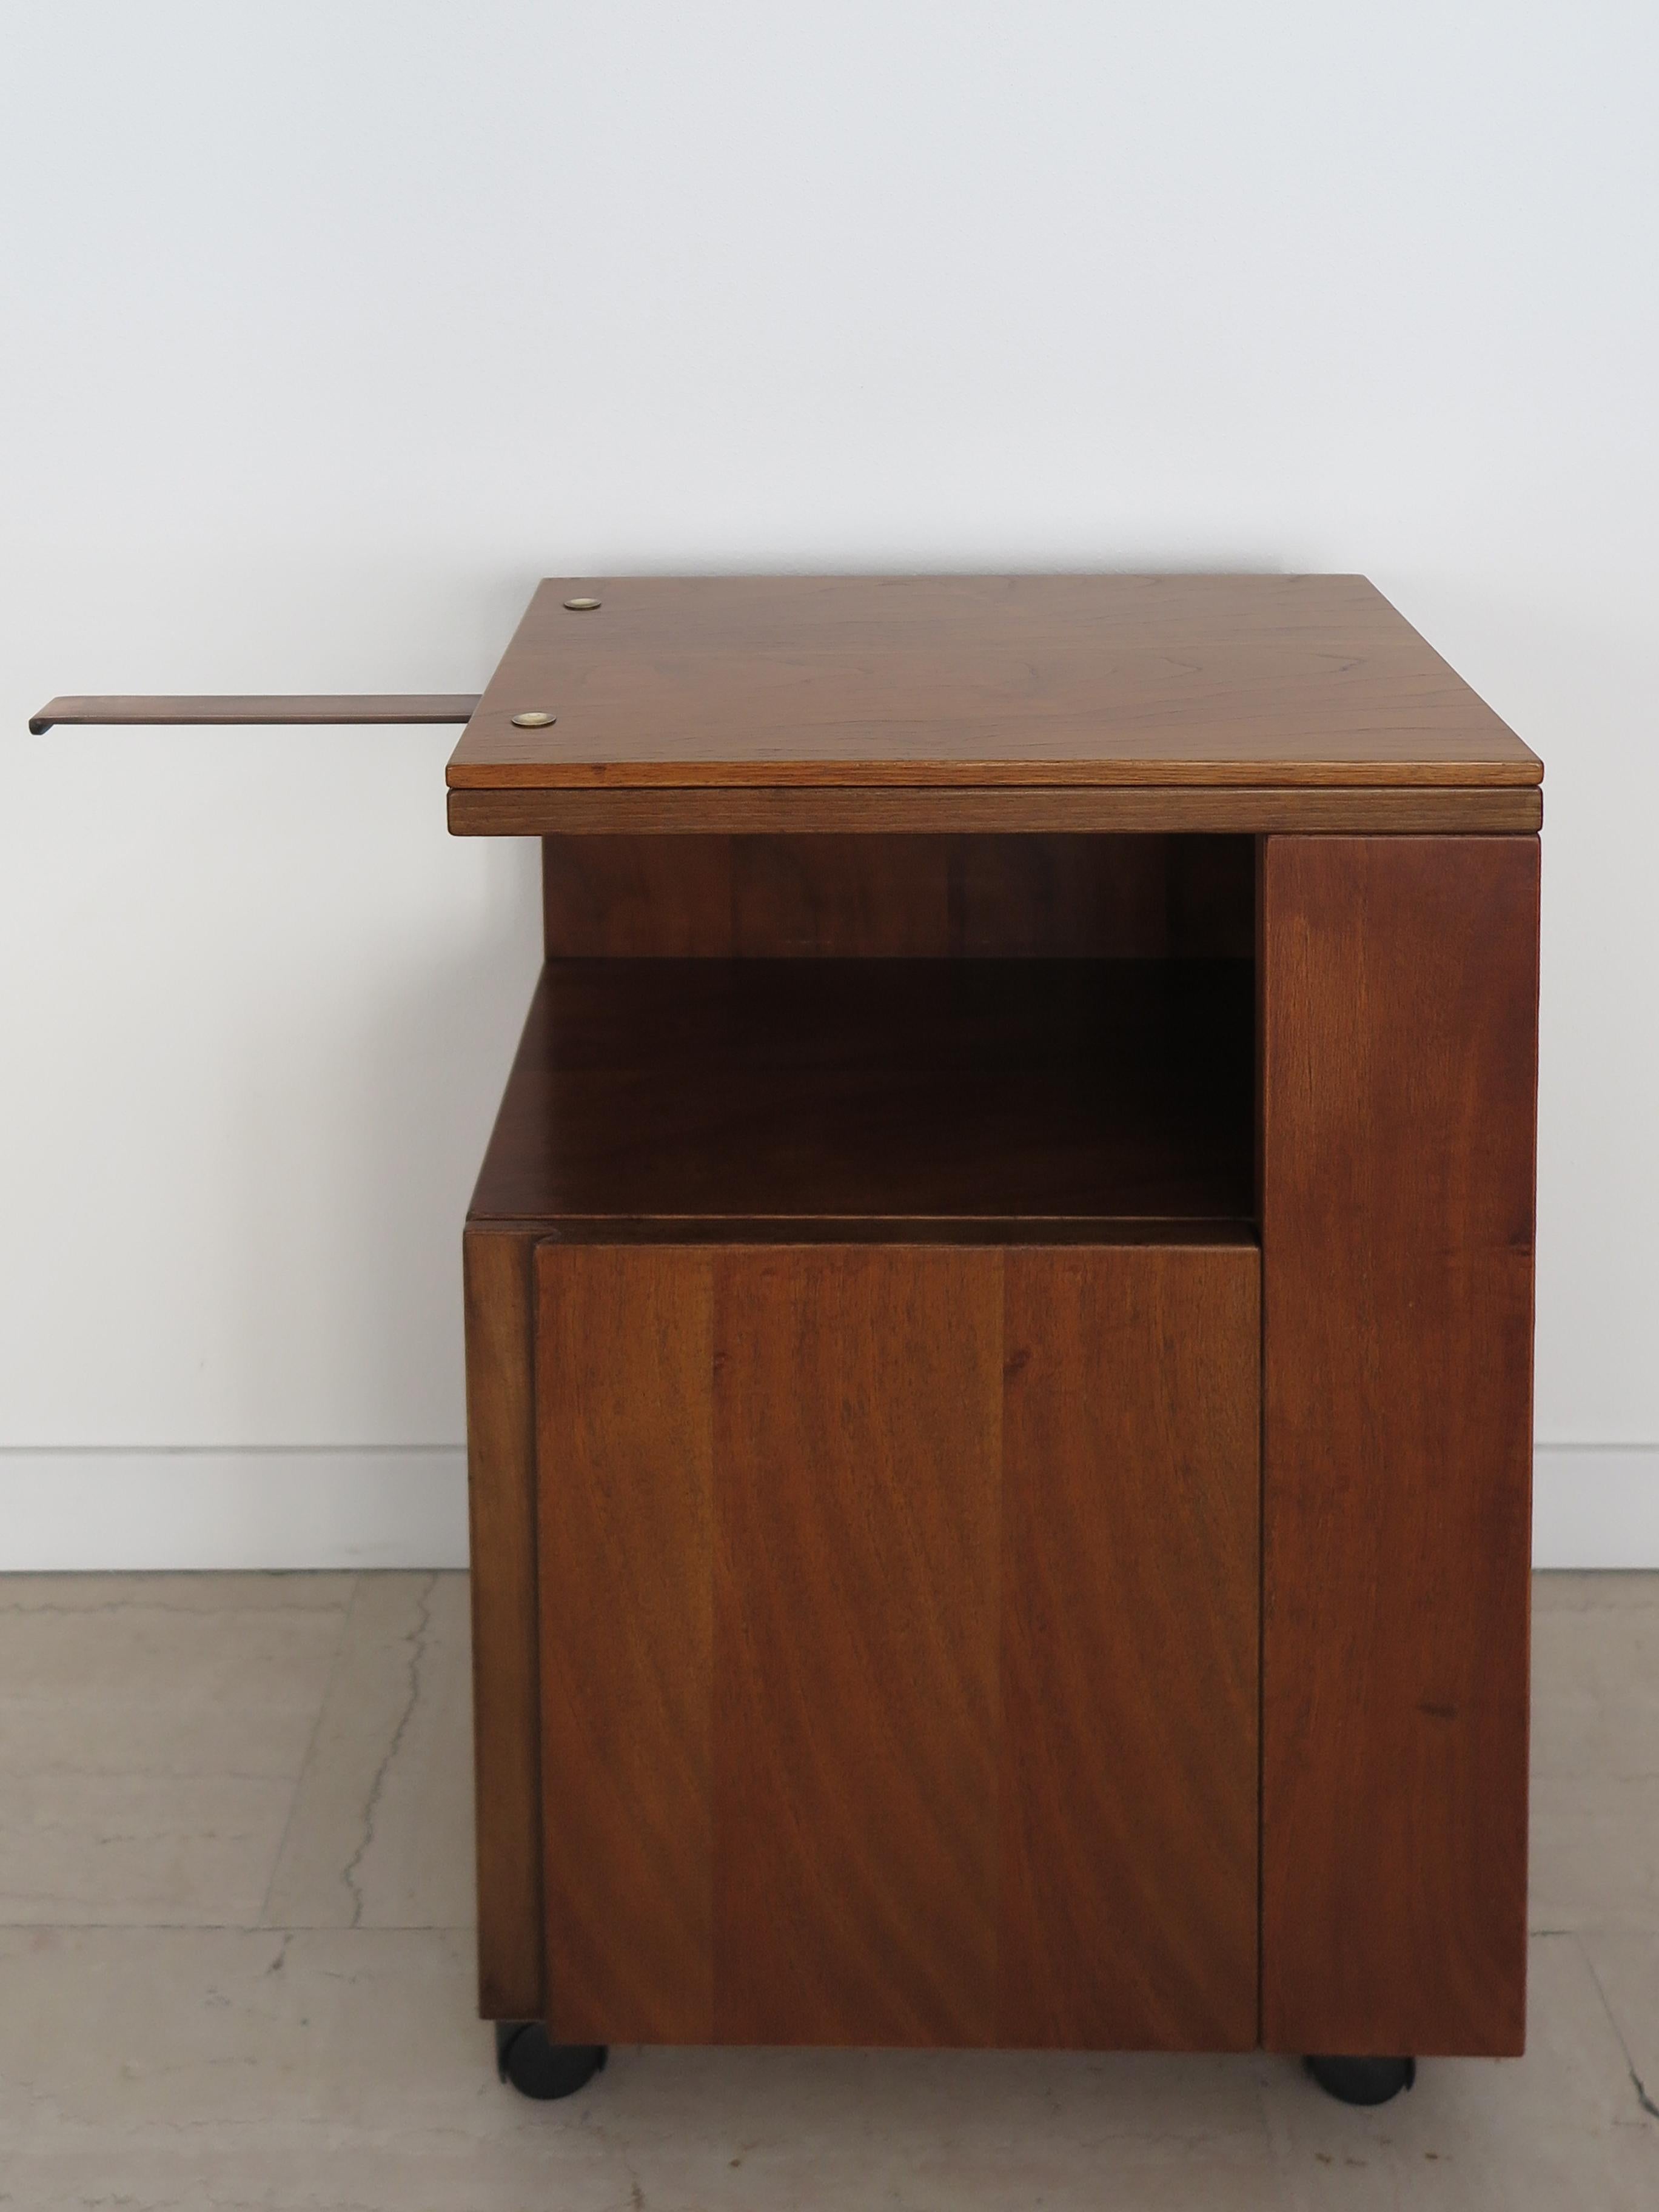 Giovanni Michelucci Poltronova Italian Wood Bedside Tables Nithg Stands 1960s For Sale 3